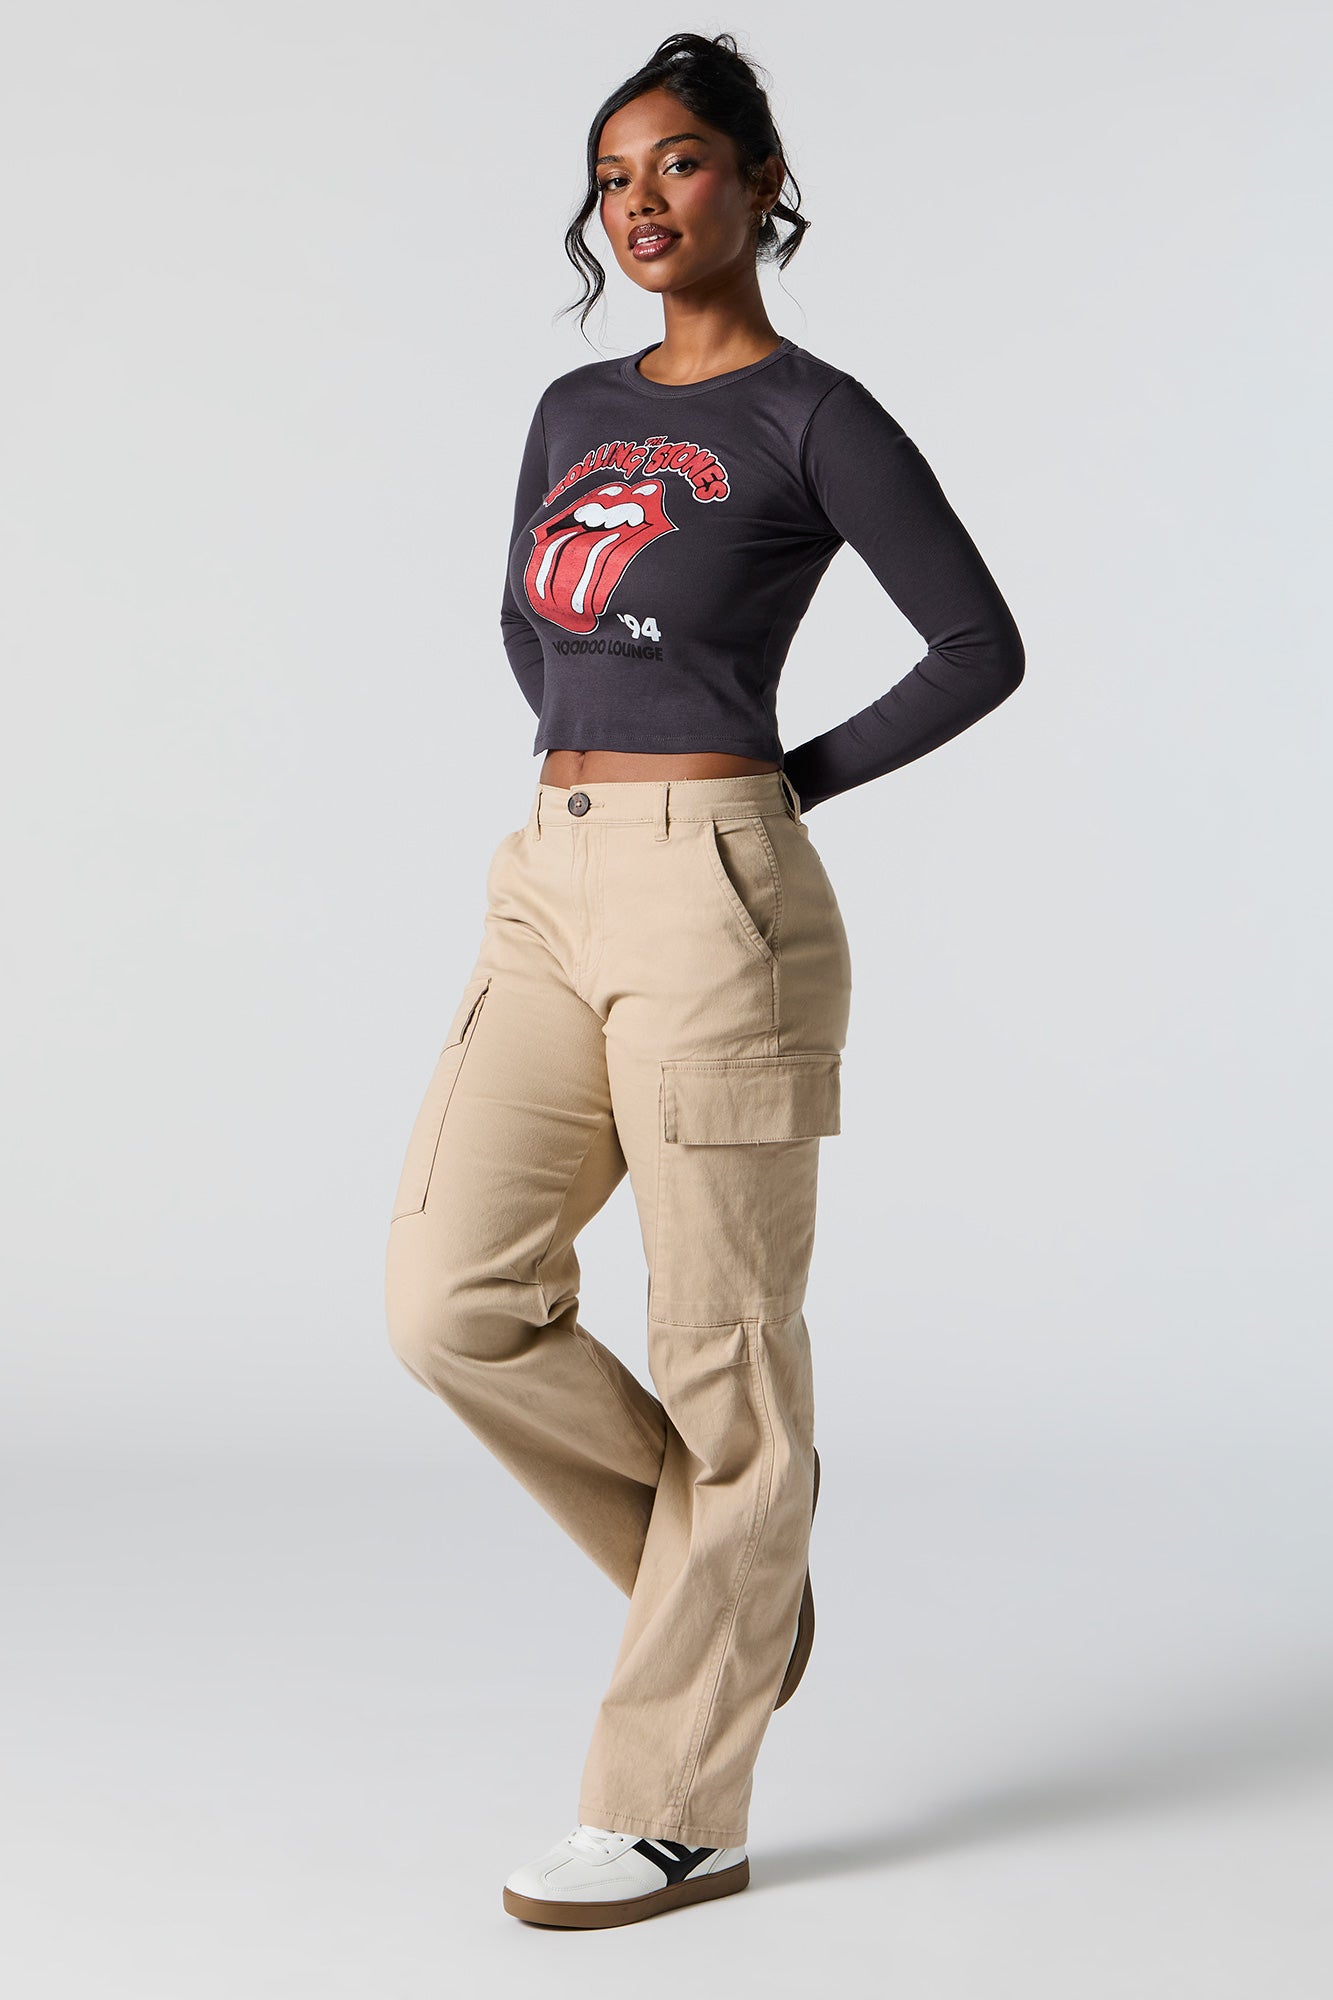 Rolling Stones Graphic Long Sleeve Top